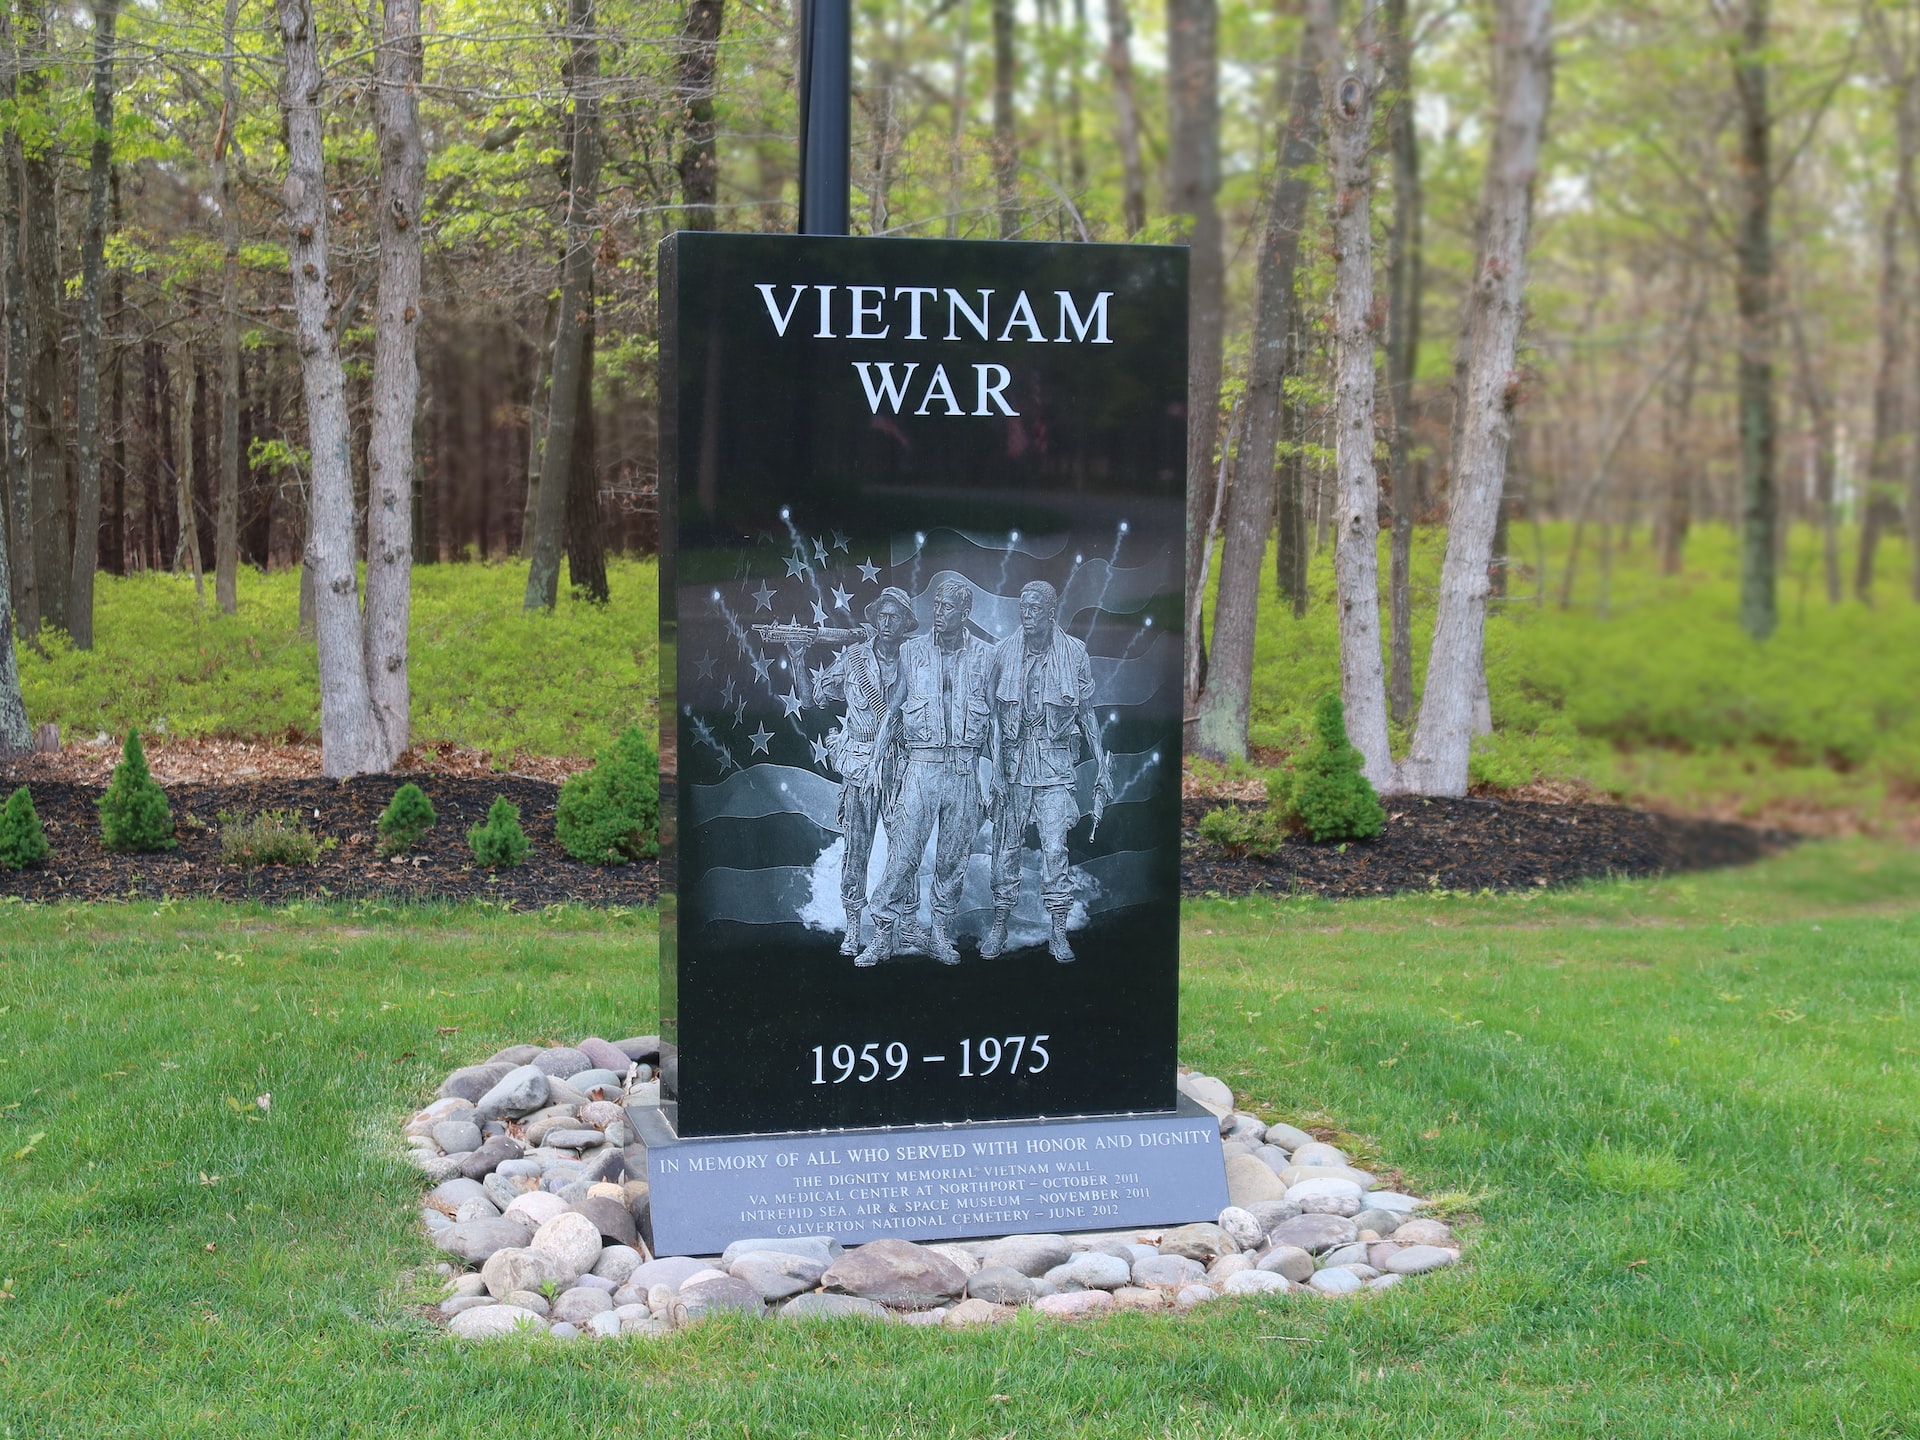 A Vietnam War memorial made of black polished stone set on a pile of small smooth rocks in a grassy wooden area